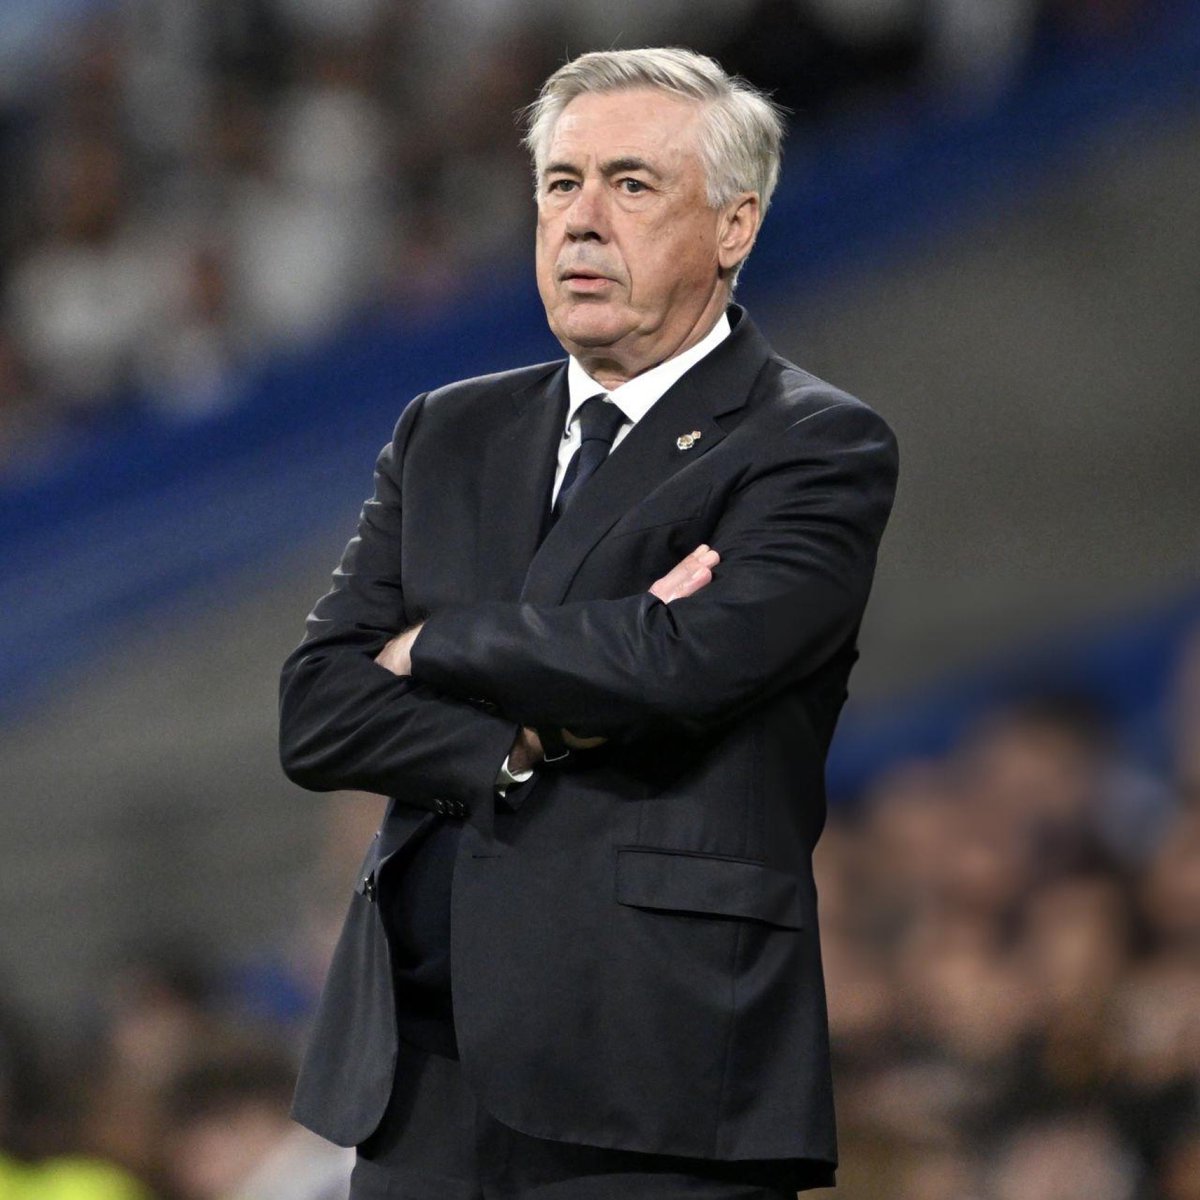 🚨 Carlo Ancelotti has insisted to his players on the need to stay focused until the UCL final arrives. He does not want anyone to sleep & believes that the best way to prepare is to compete to the maximum in each of the matches that remain before the final. @relevo